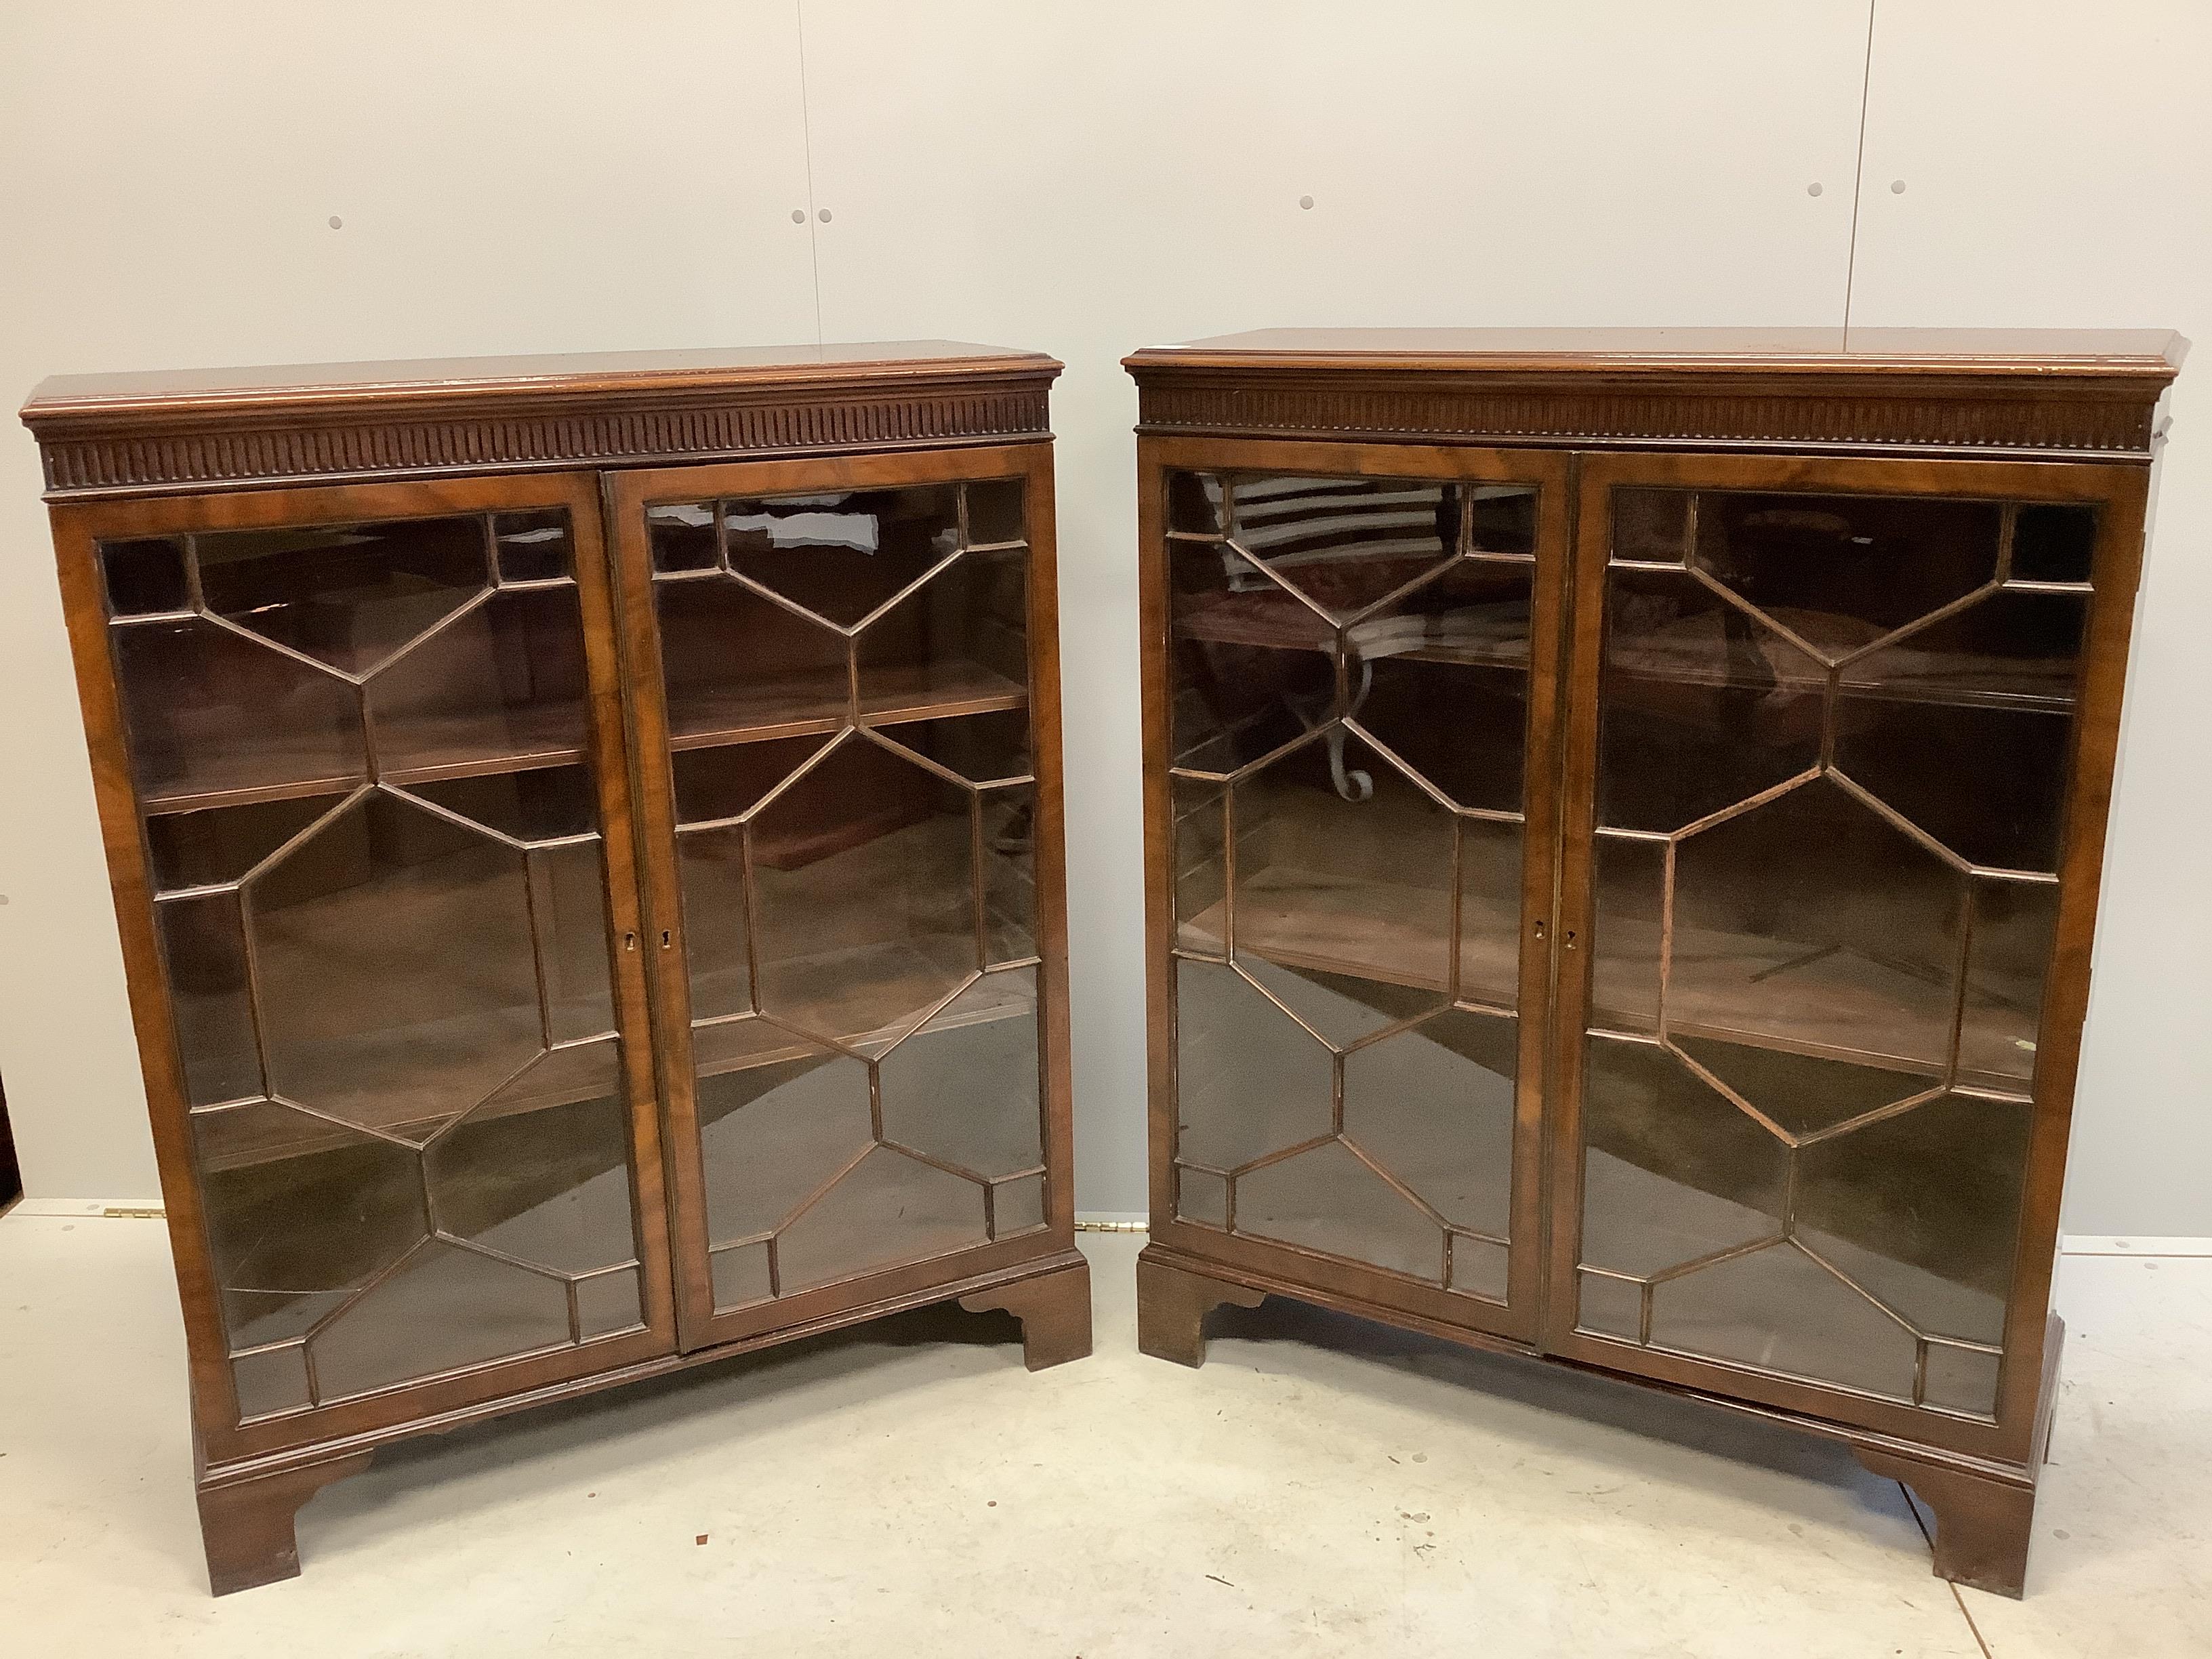 A pair of Chippendale Revival mahogany dwarf bookcases, each 97cm, depth 34cm, height 119cm